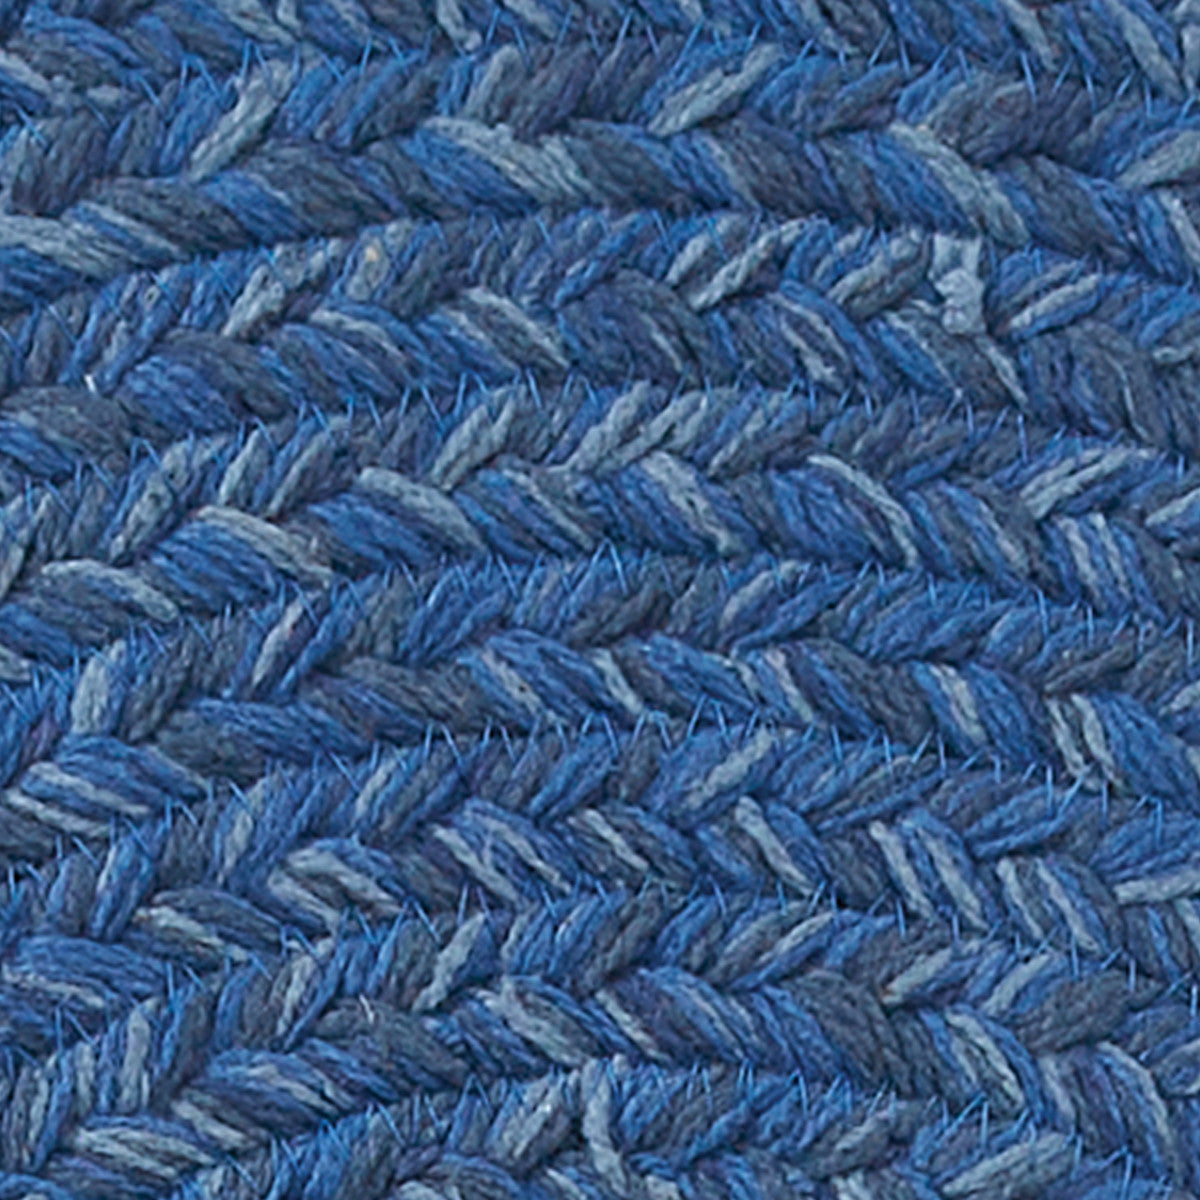 Spice Bin Braided Placemat - Blue Spice  Set of 12  Park Designs